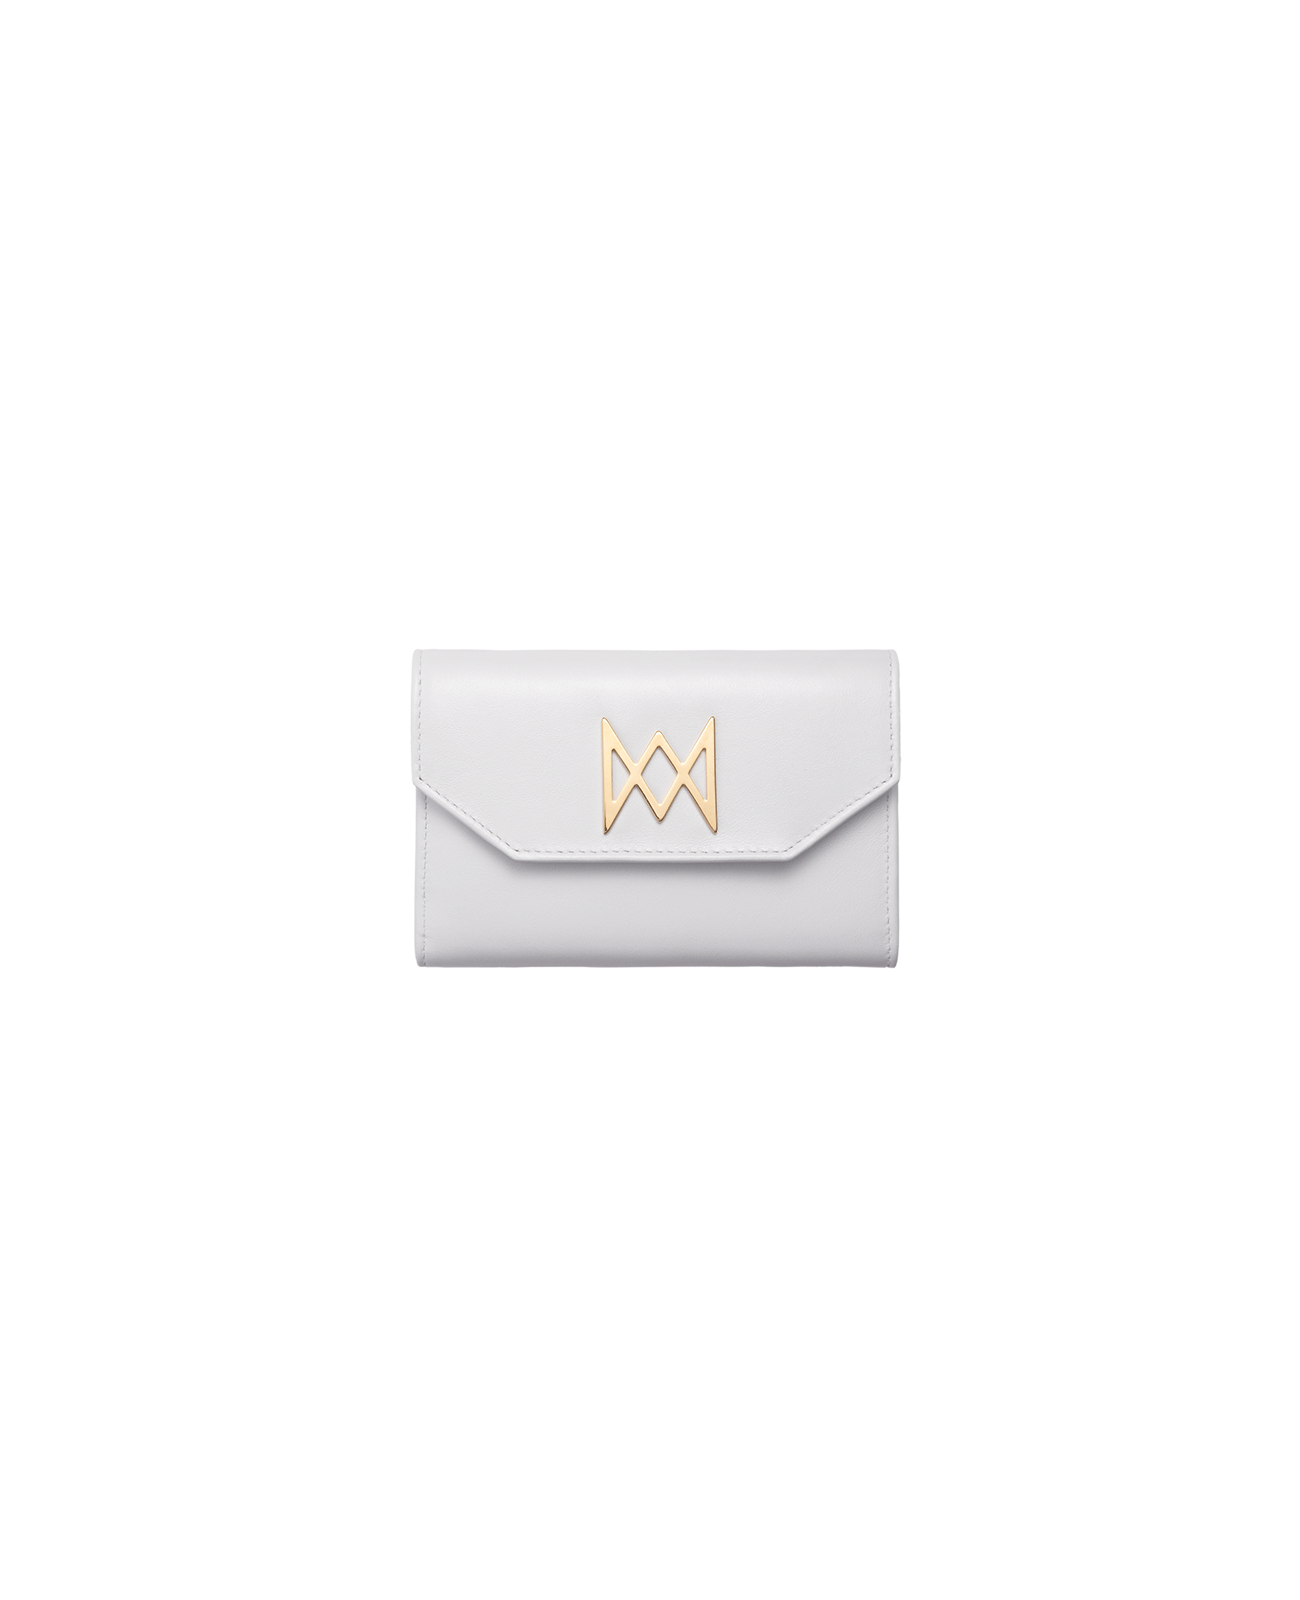 Wallet in Italian full-grain leather. Designed to carry your personal items. Available in a variety of styles and designs. Color: Ivory. Size: Mini